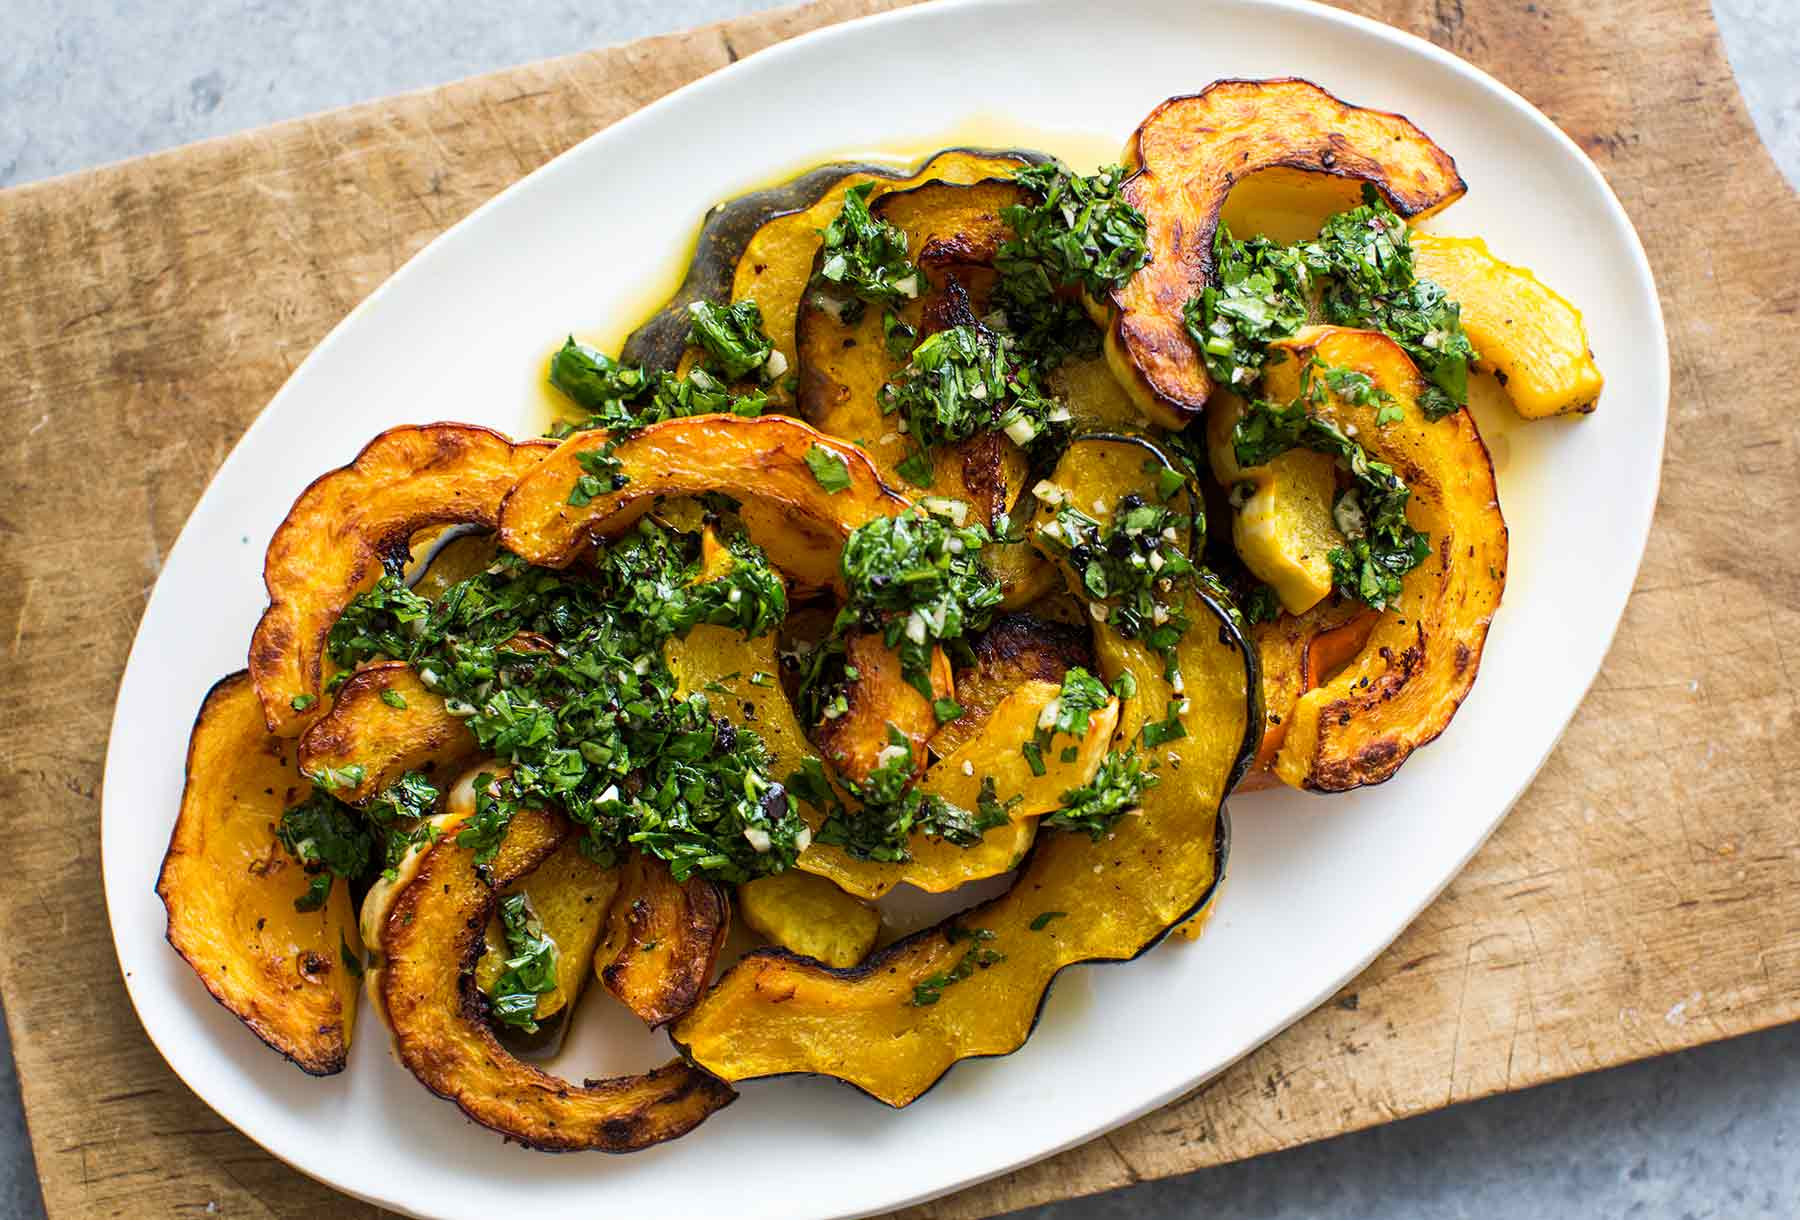 Winter Vegetable Side Dishes
 Roasted Winter Squash with Cilantro Chimichurri Recipe